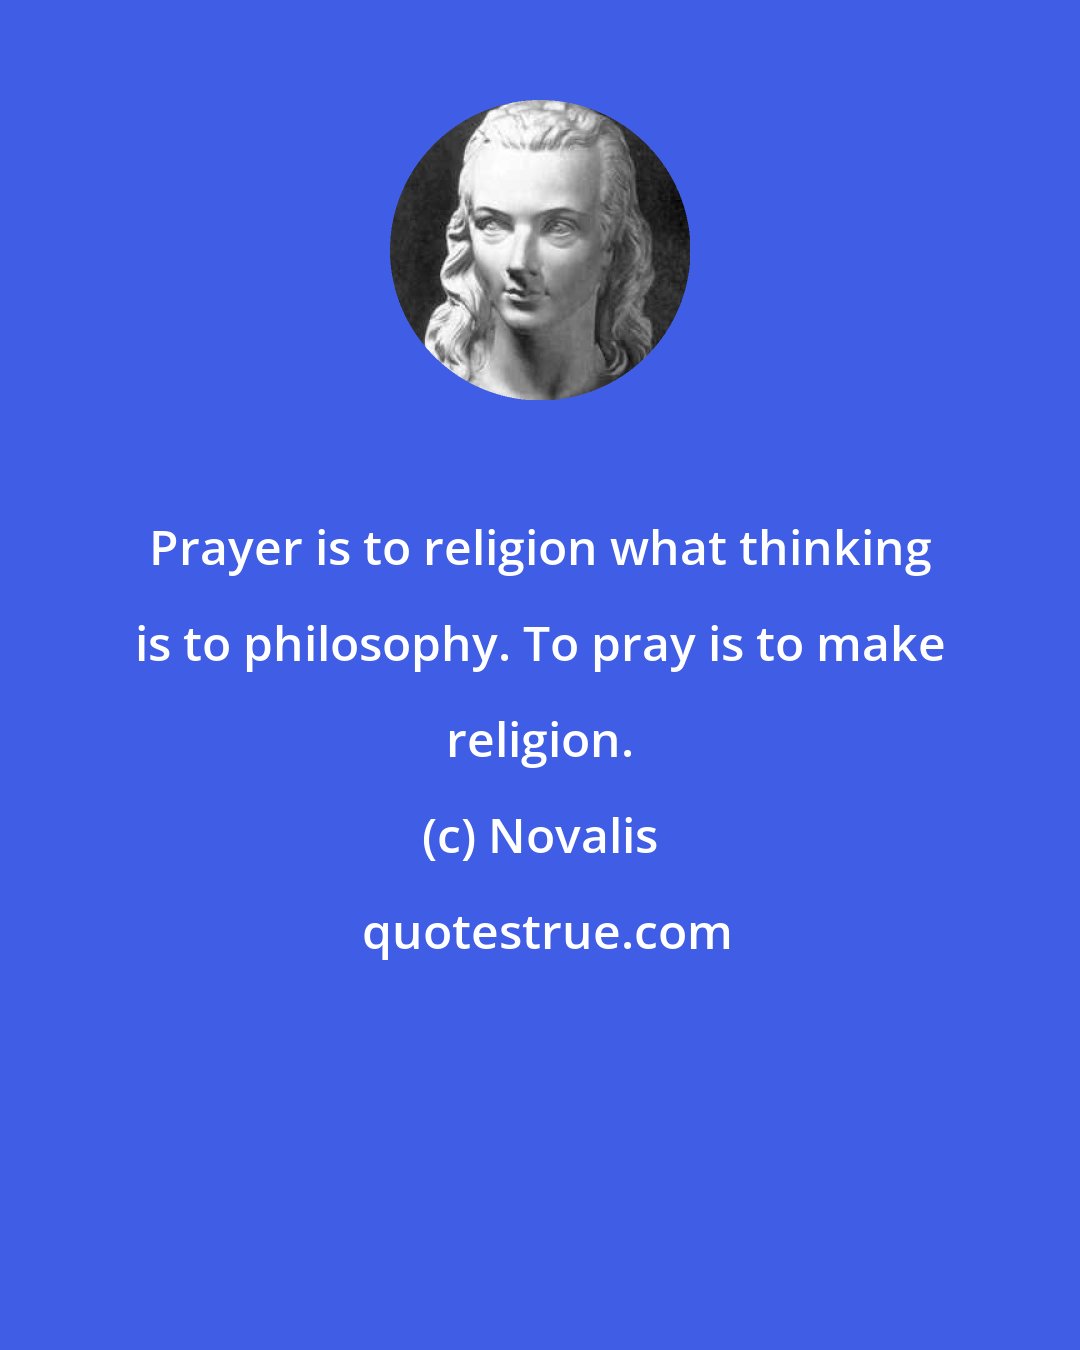 Novalis: Prayer is to religion what thinking is to philosophy. To pray is to make religion.